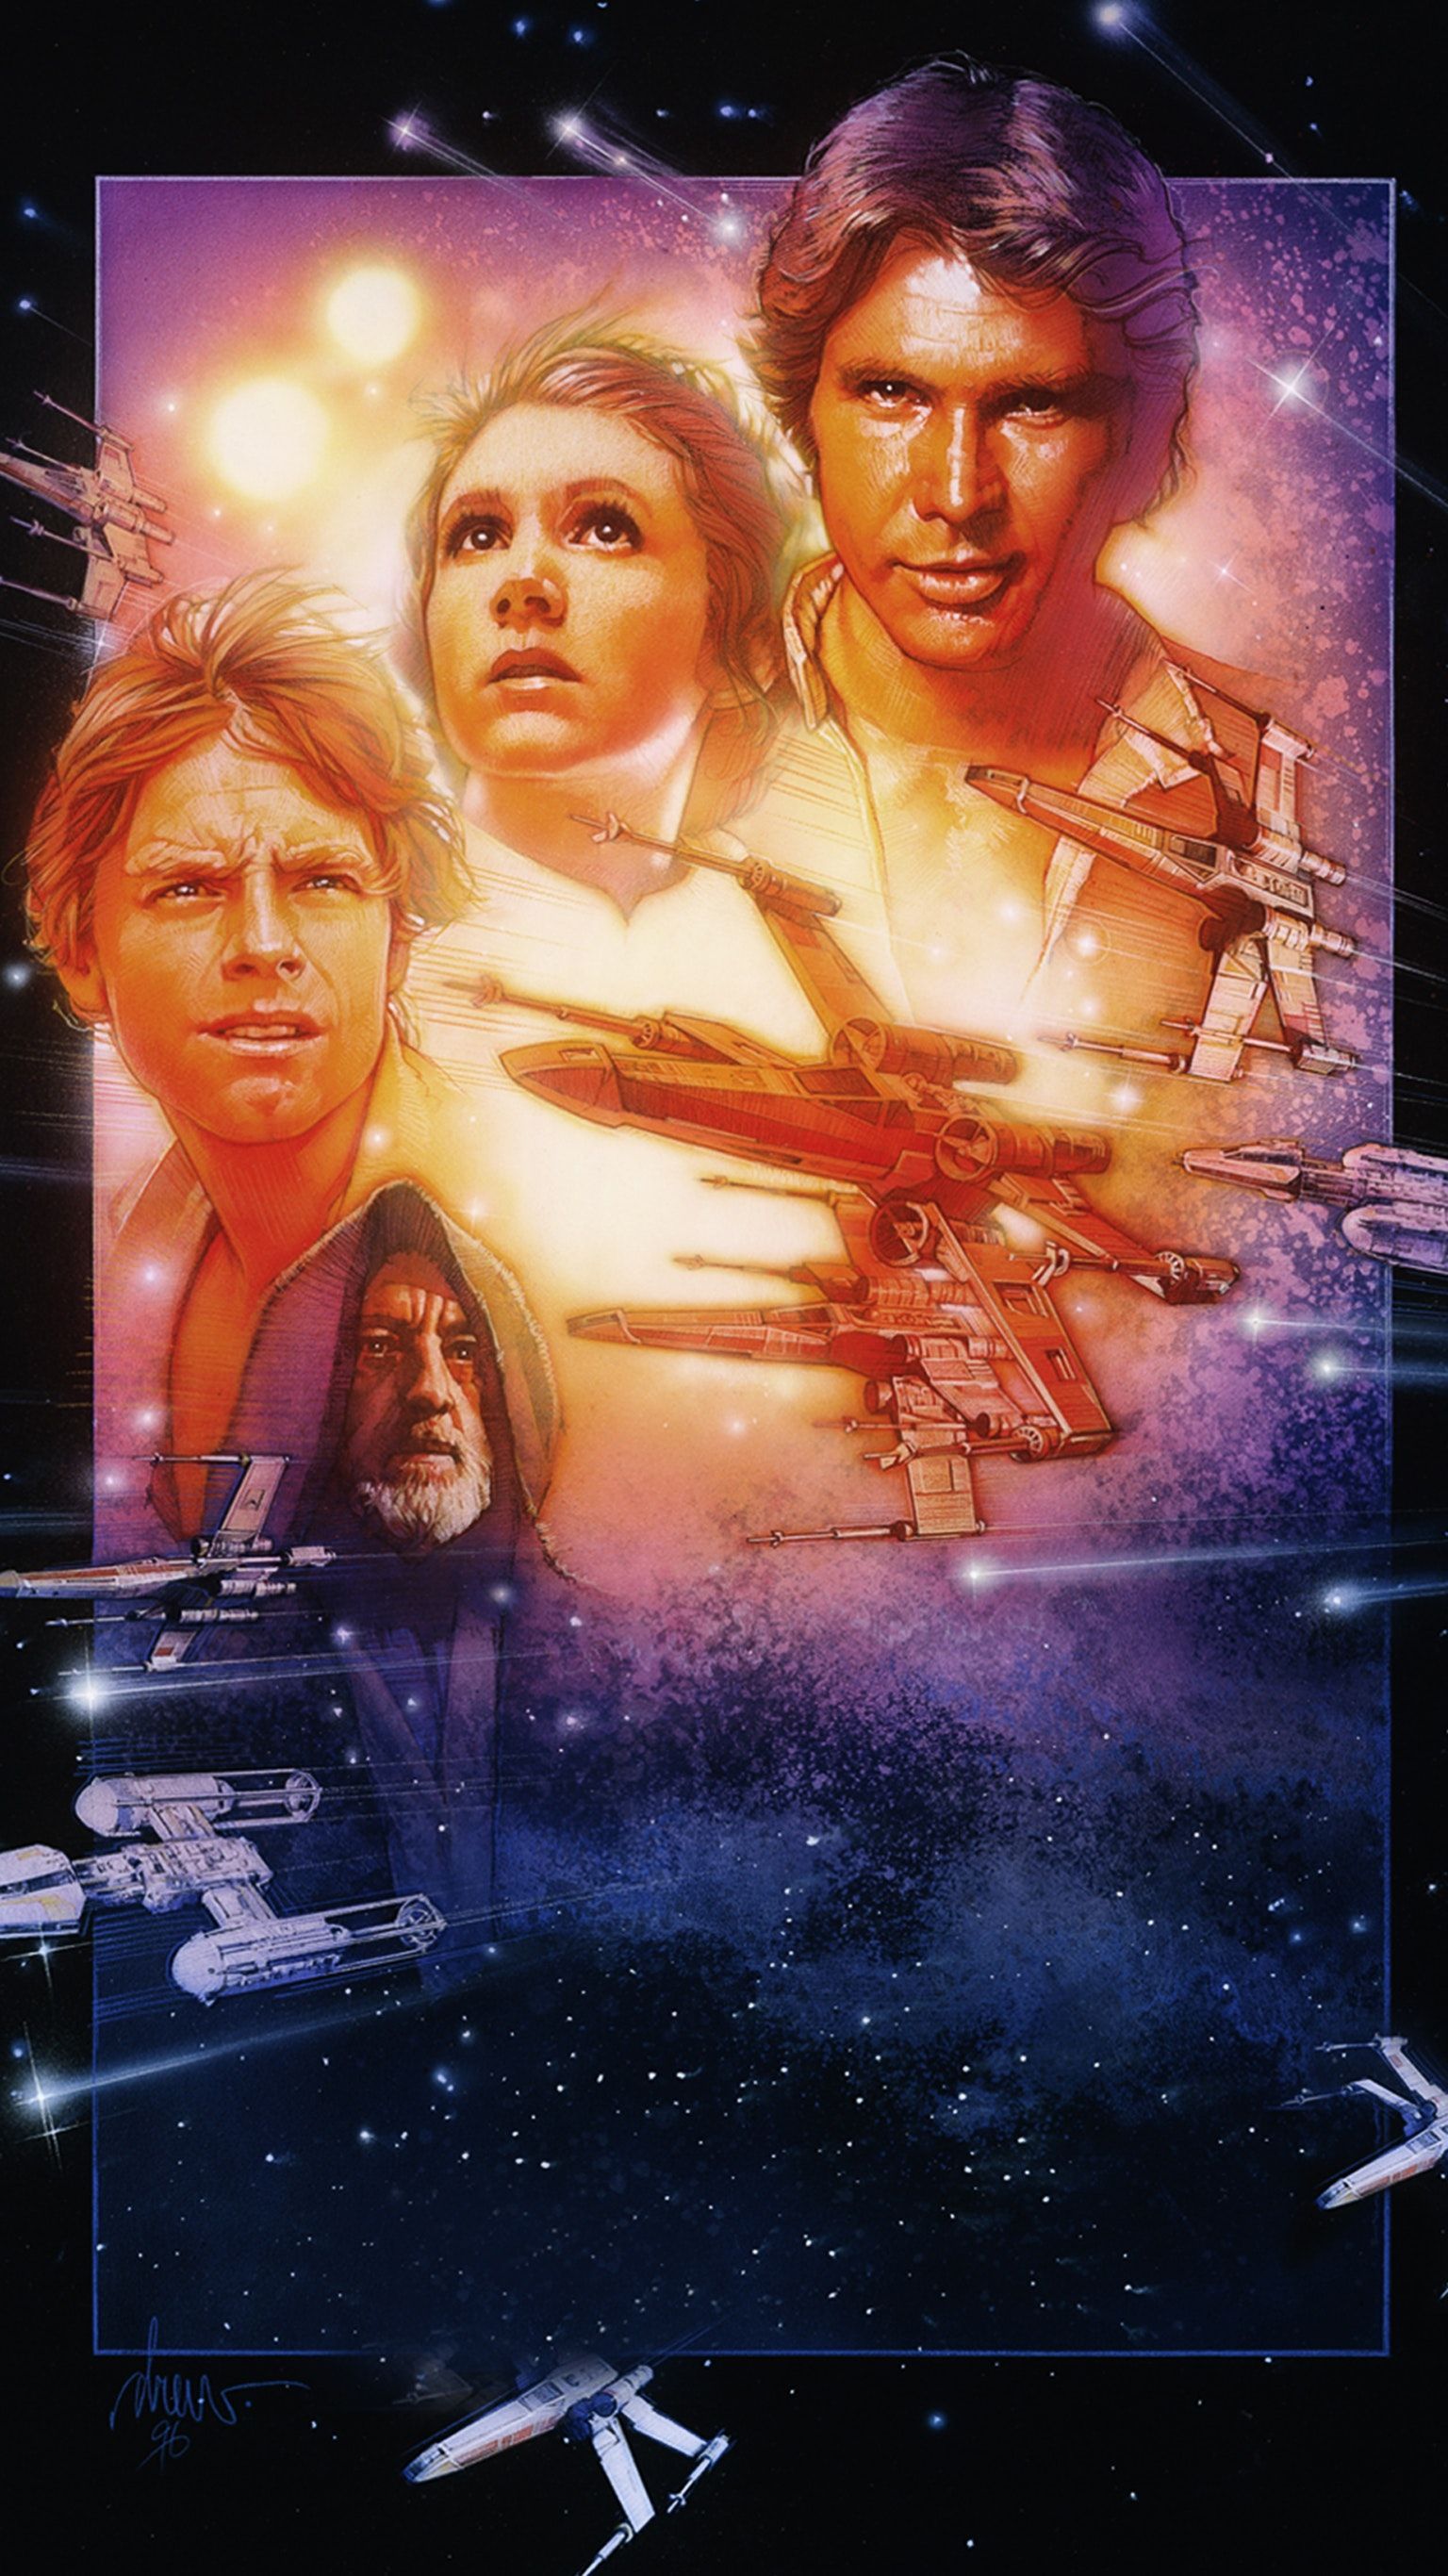 Star Wars: Episode IV - A New Hope Wallpapers - Wallpaper Cave